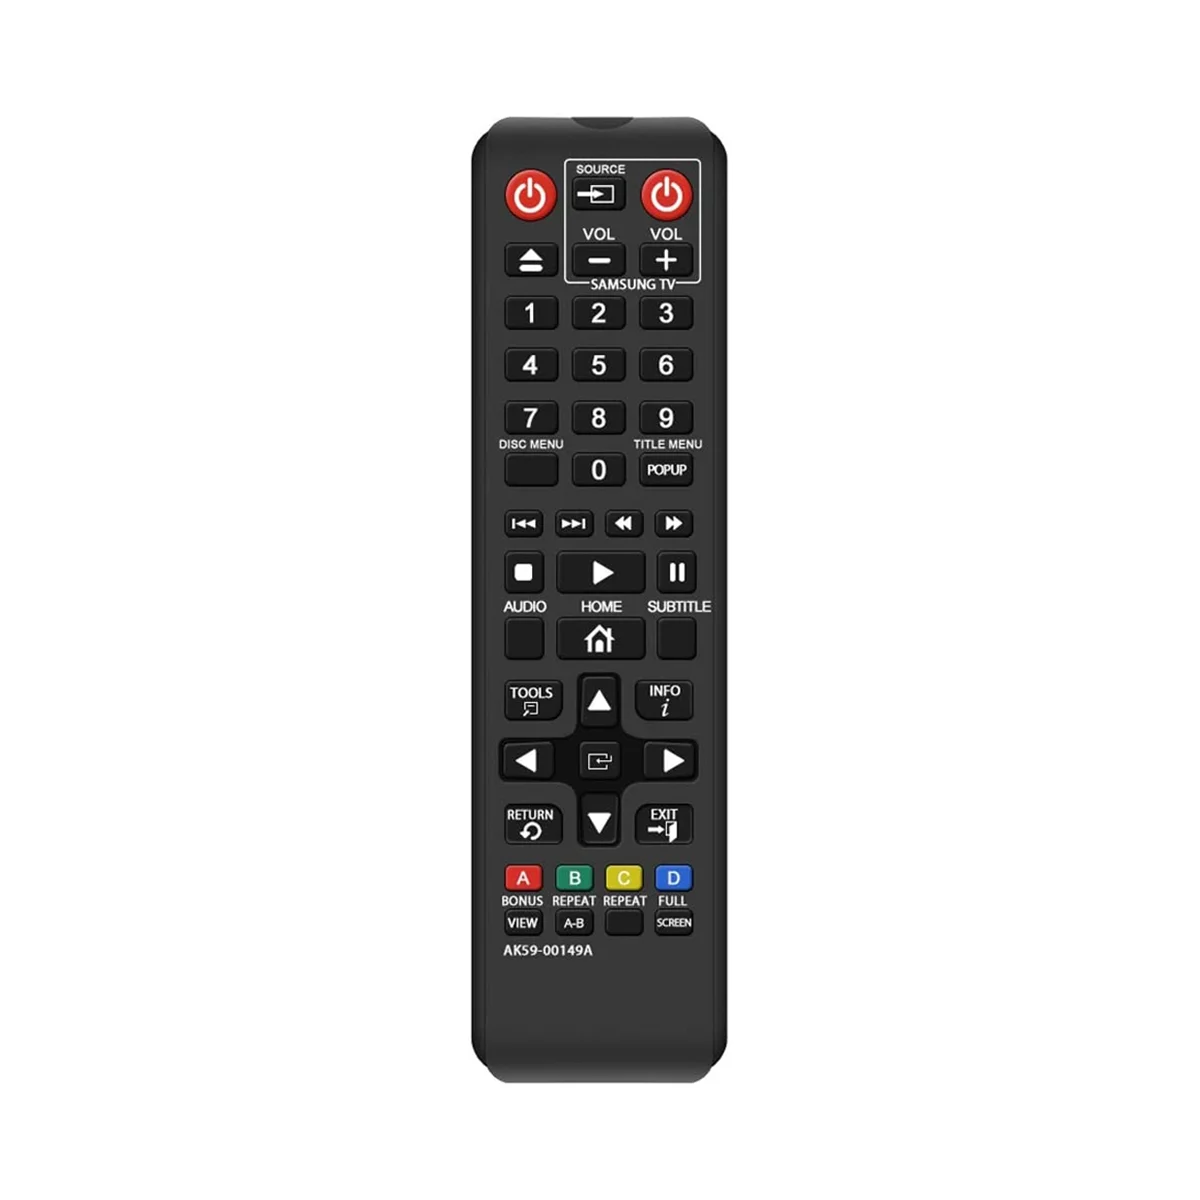 

AK59-00149A Remote Control Replacement for Samsung DVD Blu-Ray Player BDF5100/ZA BD-ES5300 BD-FM51 BD-FM57C BD-H5100